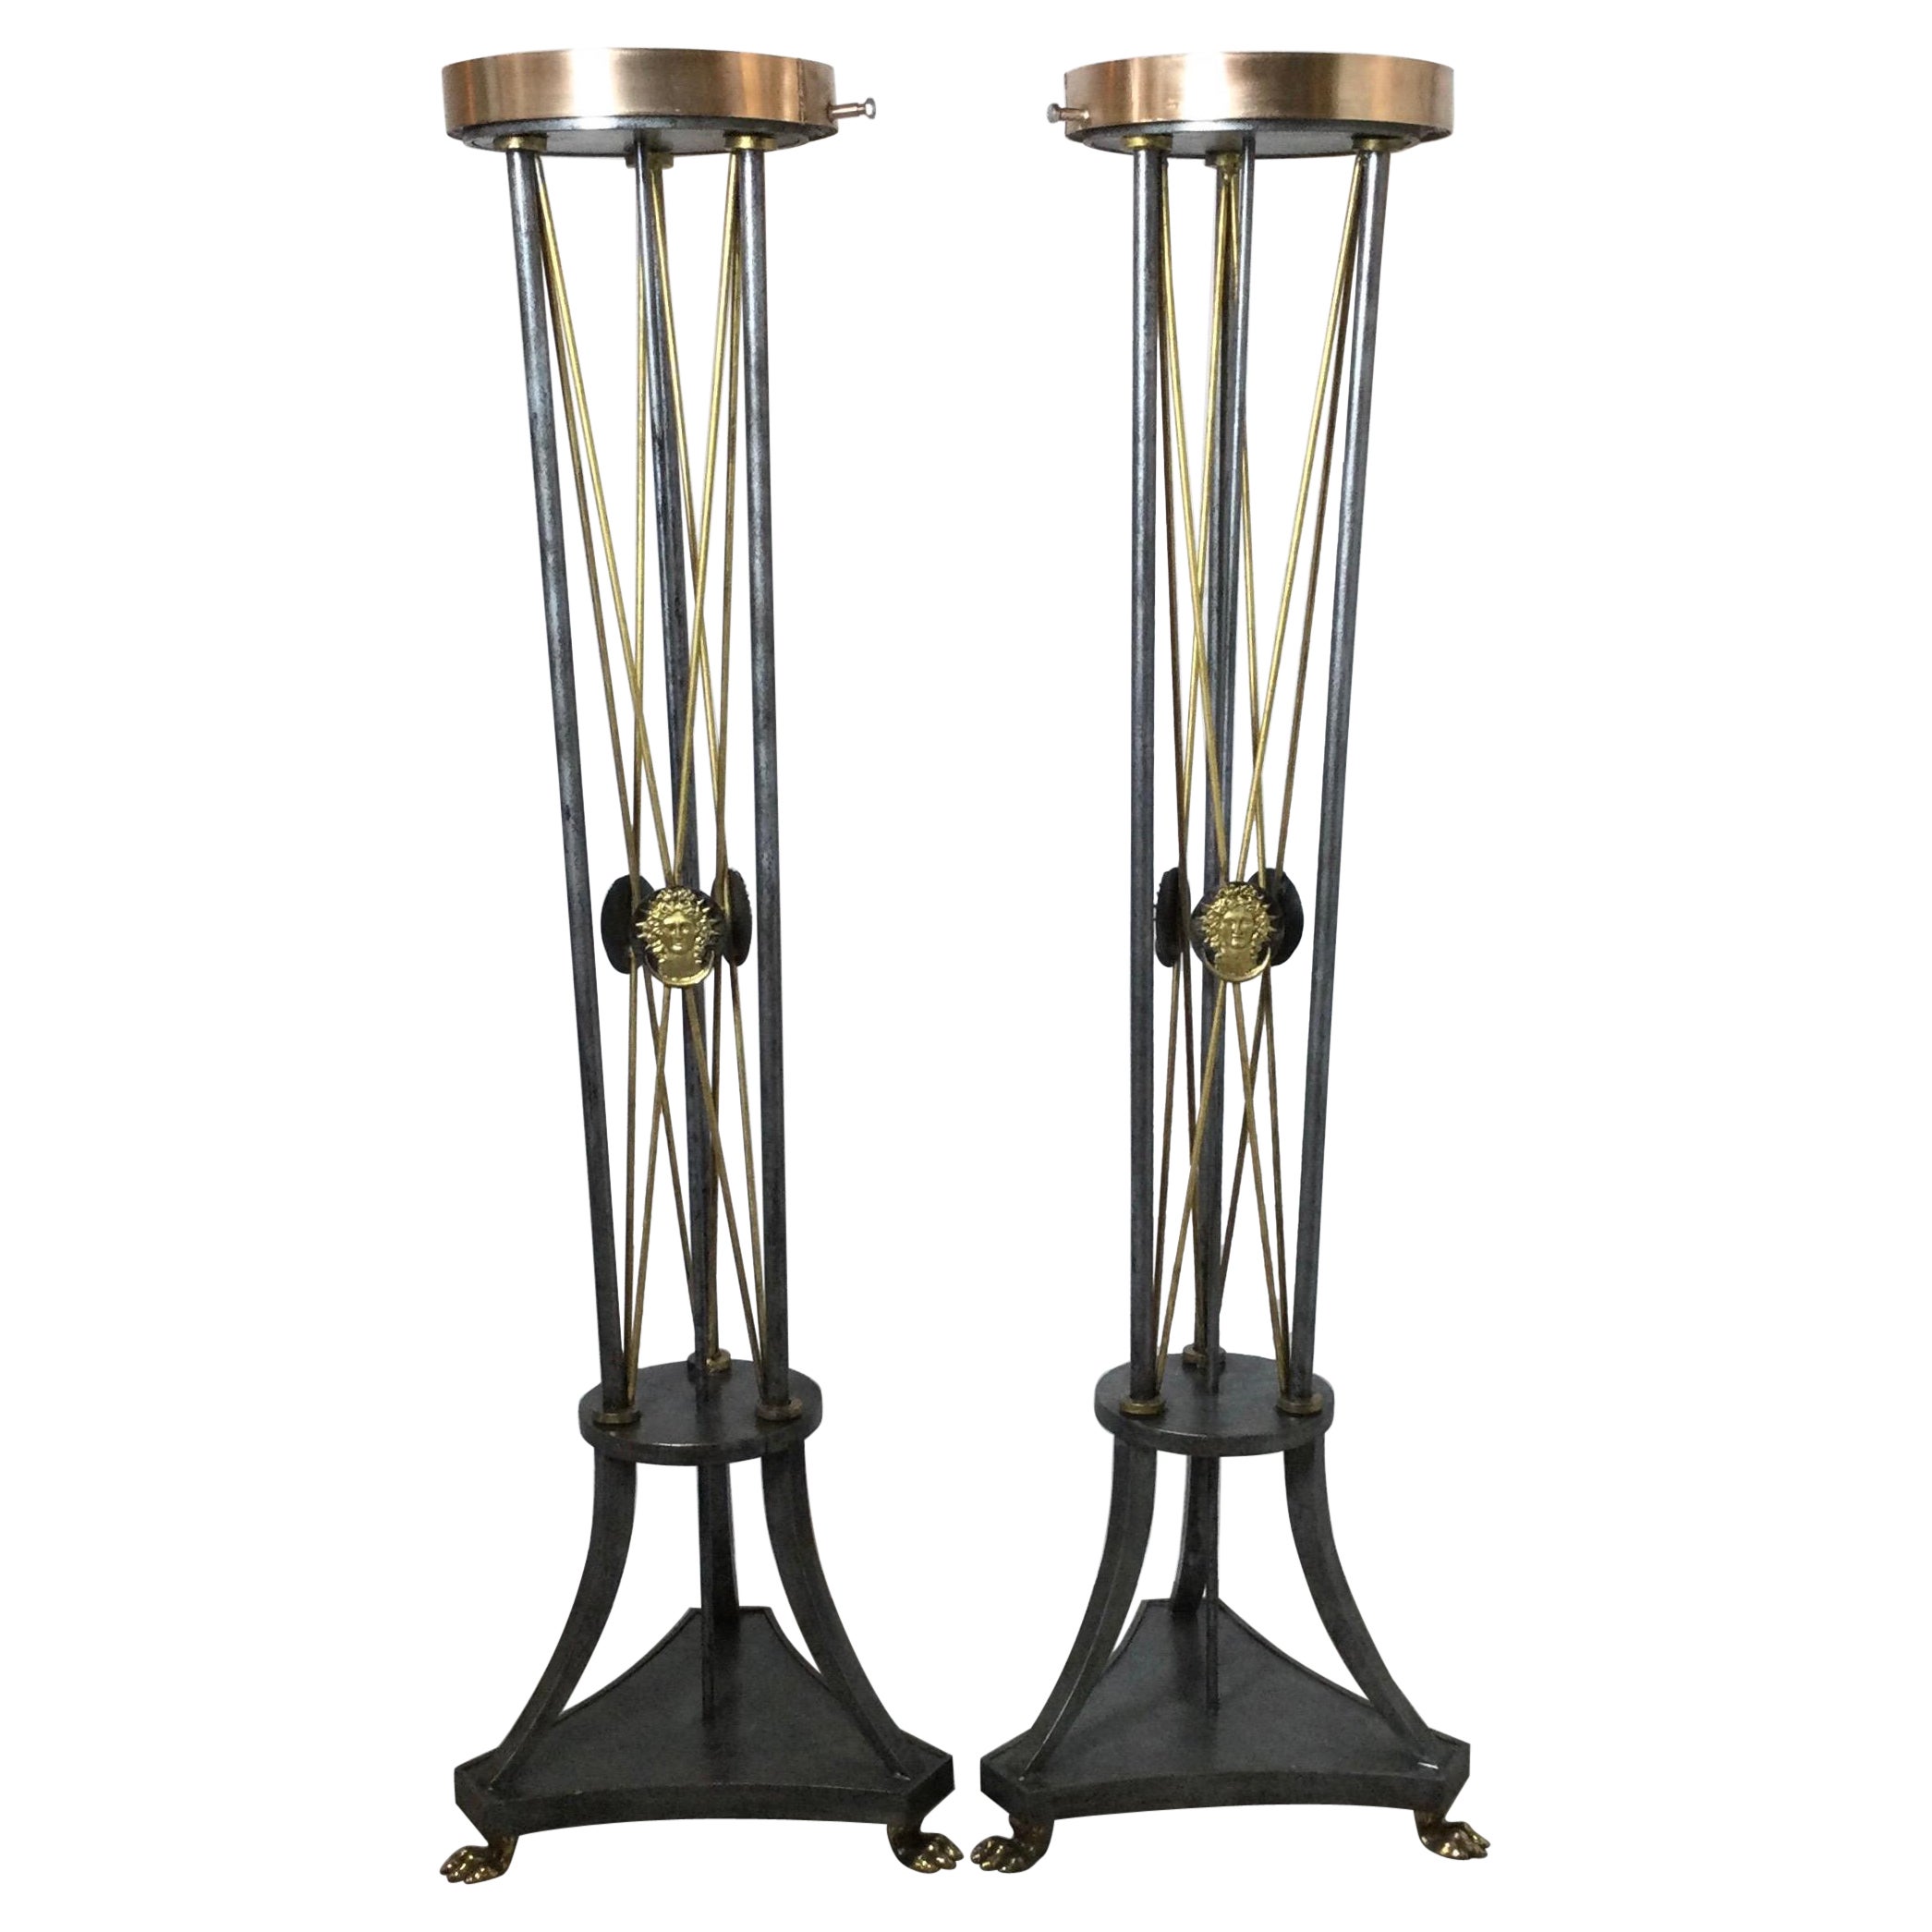 Pair of Directoire' Style Tall Pedestal Stands